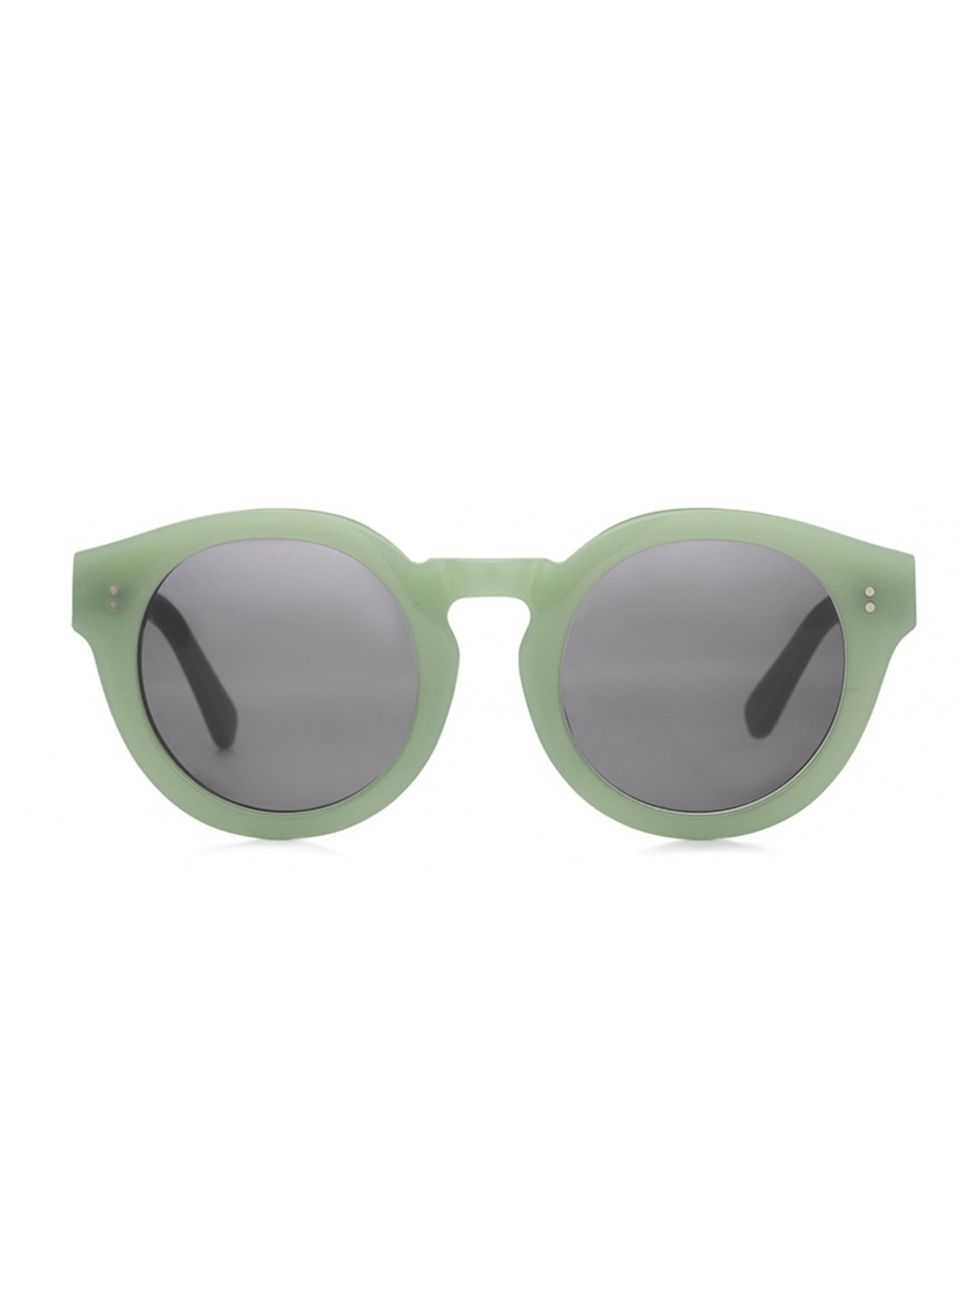 <p>New heatwave, new sunnies...says Editorial Assistant Gilliant Brett. </p>

<p> </p>

<p><a href="https://www.aceandtate.com/women-sunglasses/robin-frosted-mint-s" target="_blank">Ace & Tate</a> Sunglasses, £89</p>